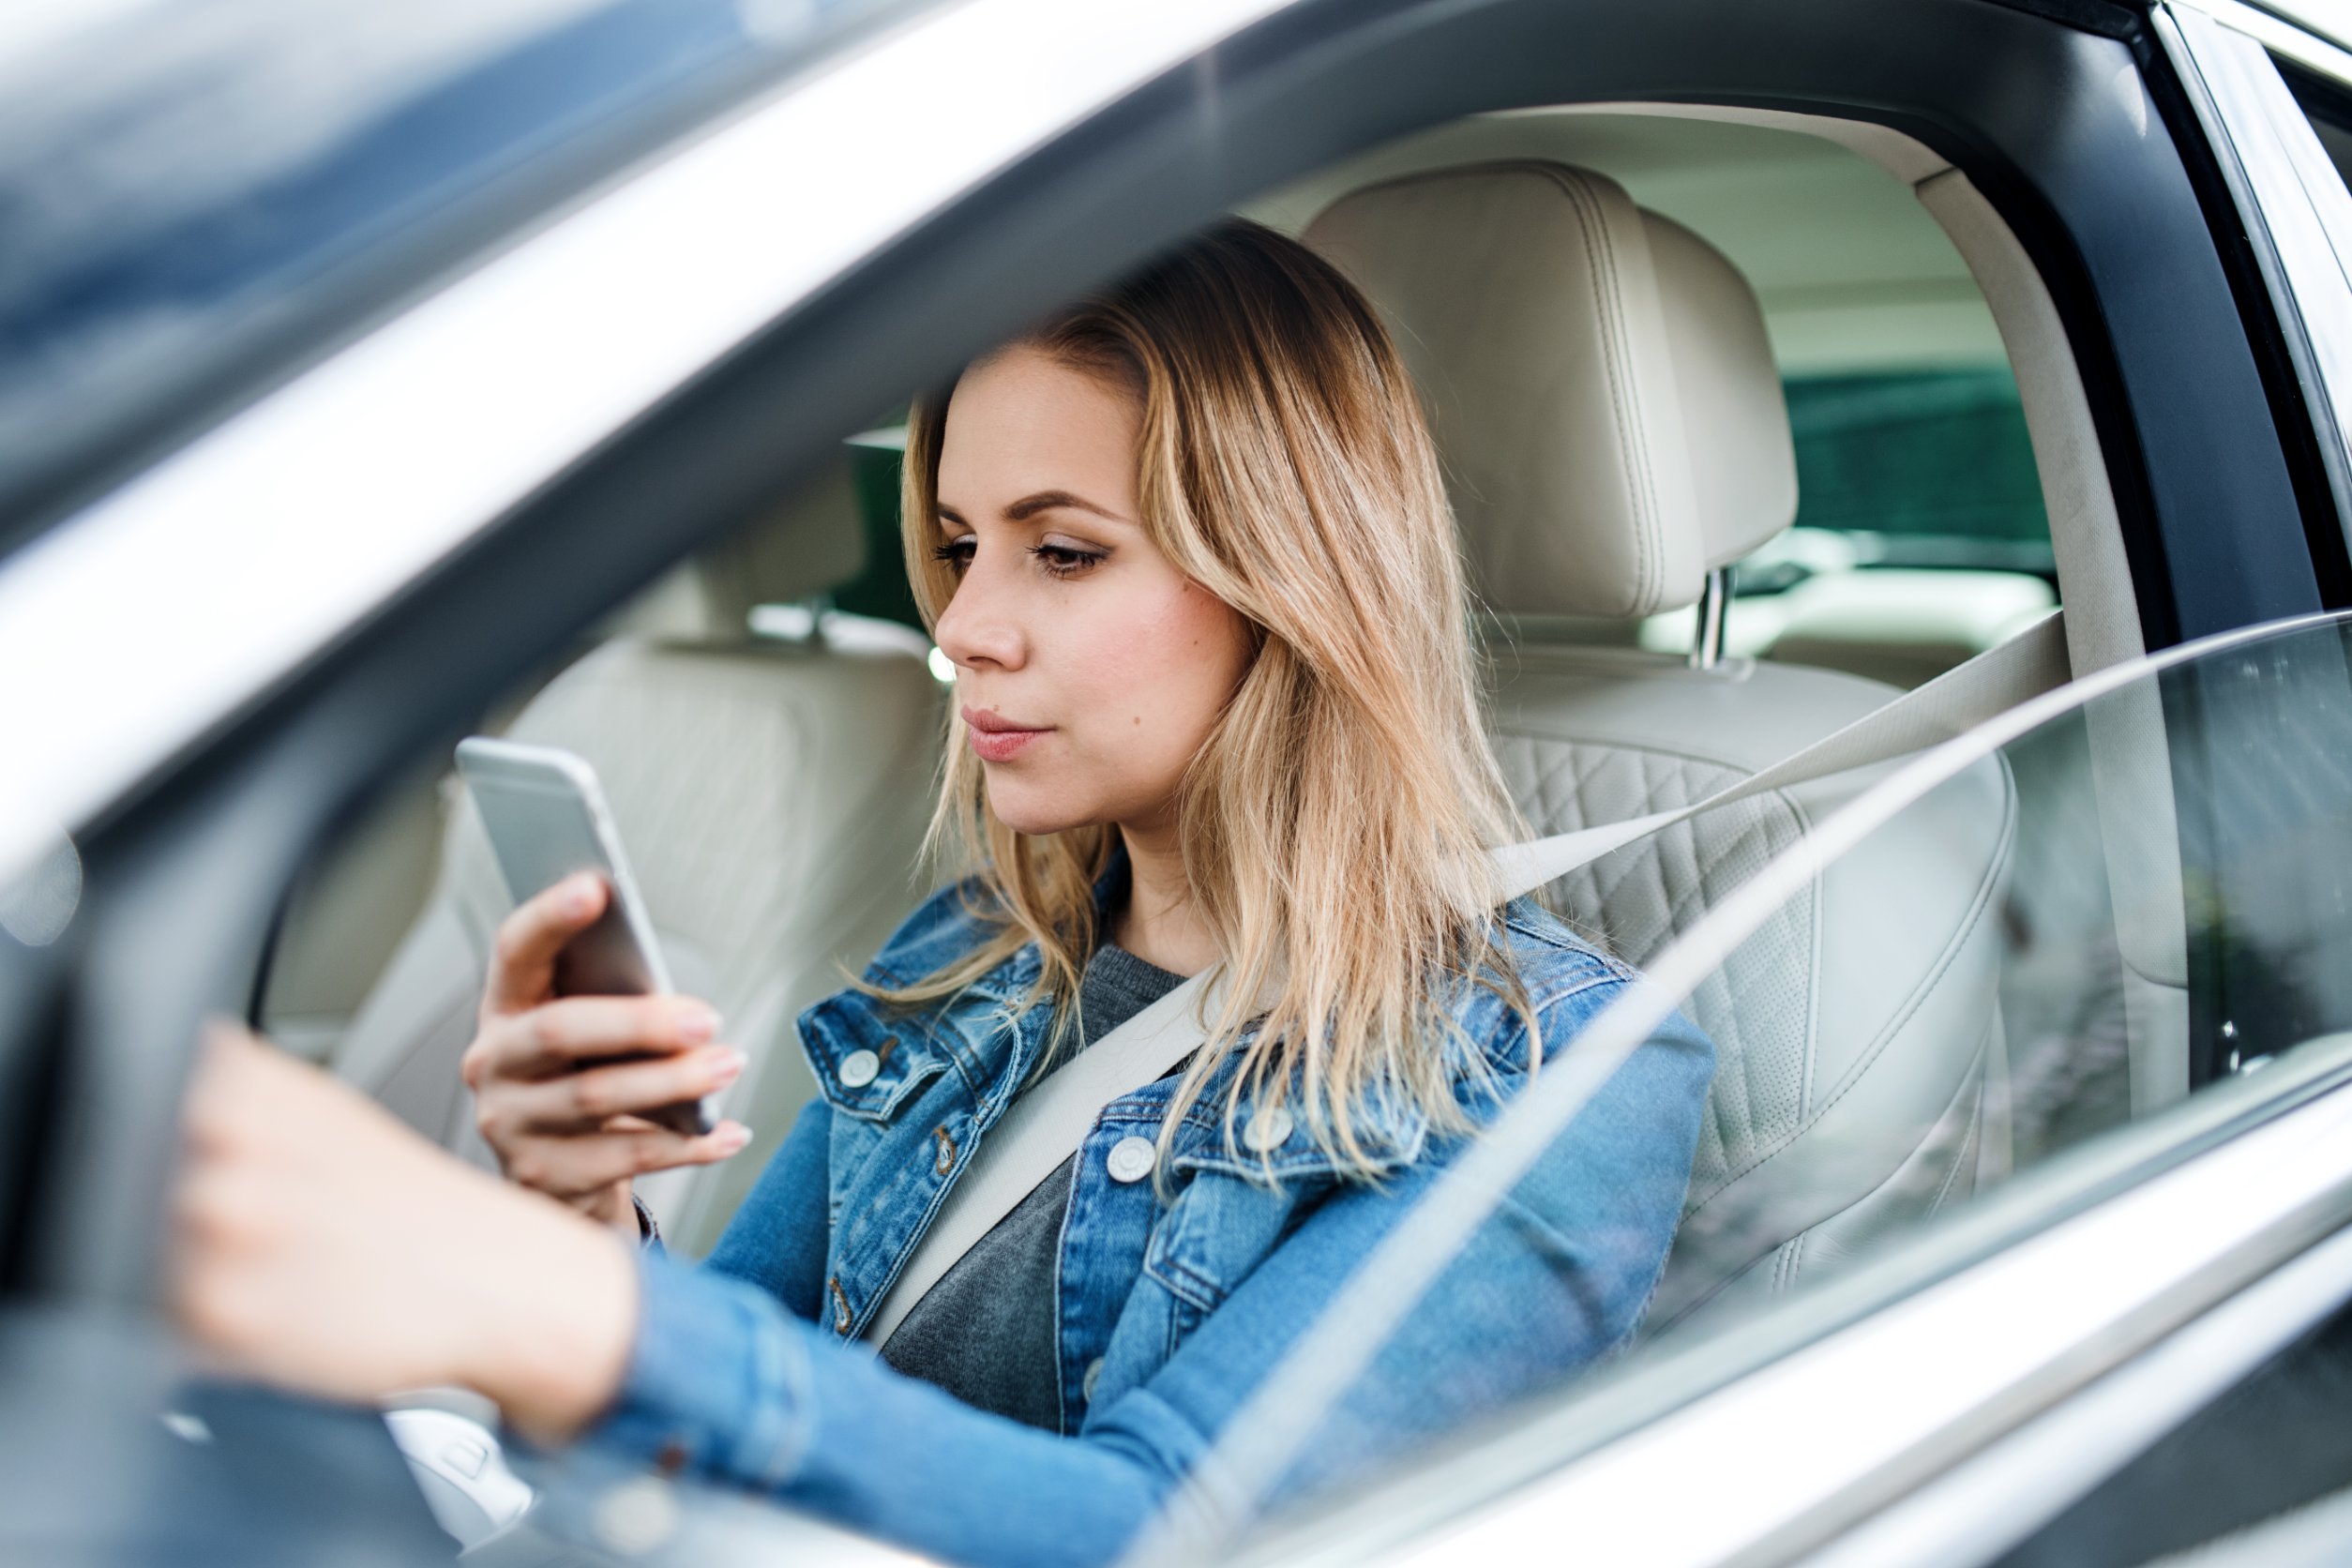 Distracted Driving, Biking, and Pedestrian Statistics That May Surprise You